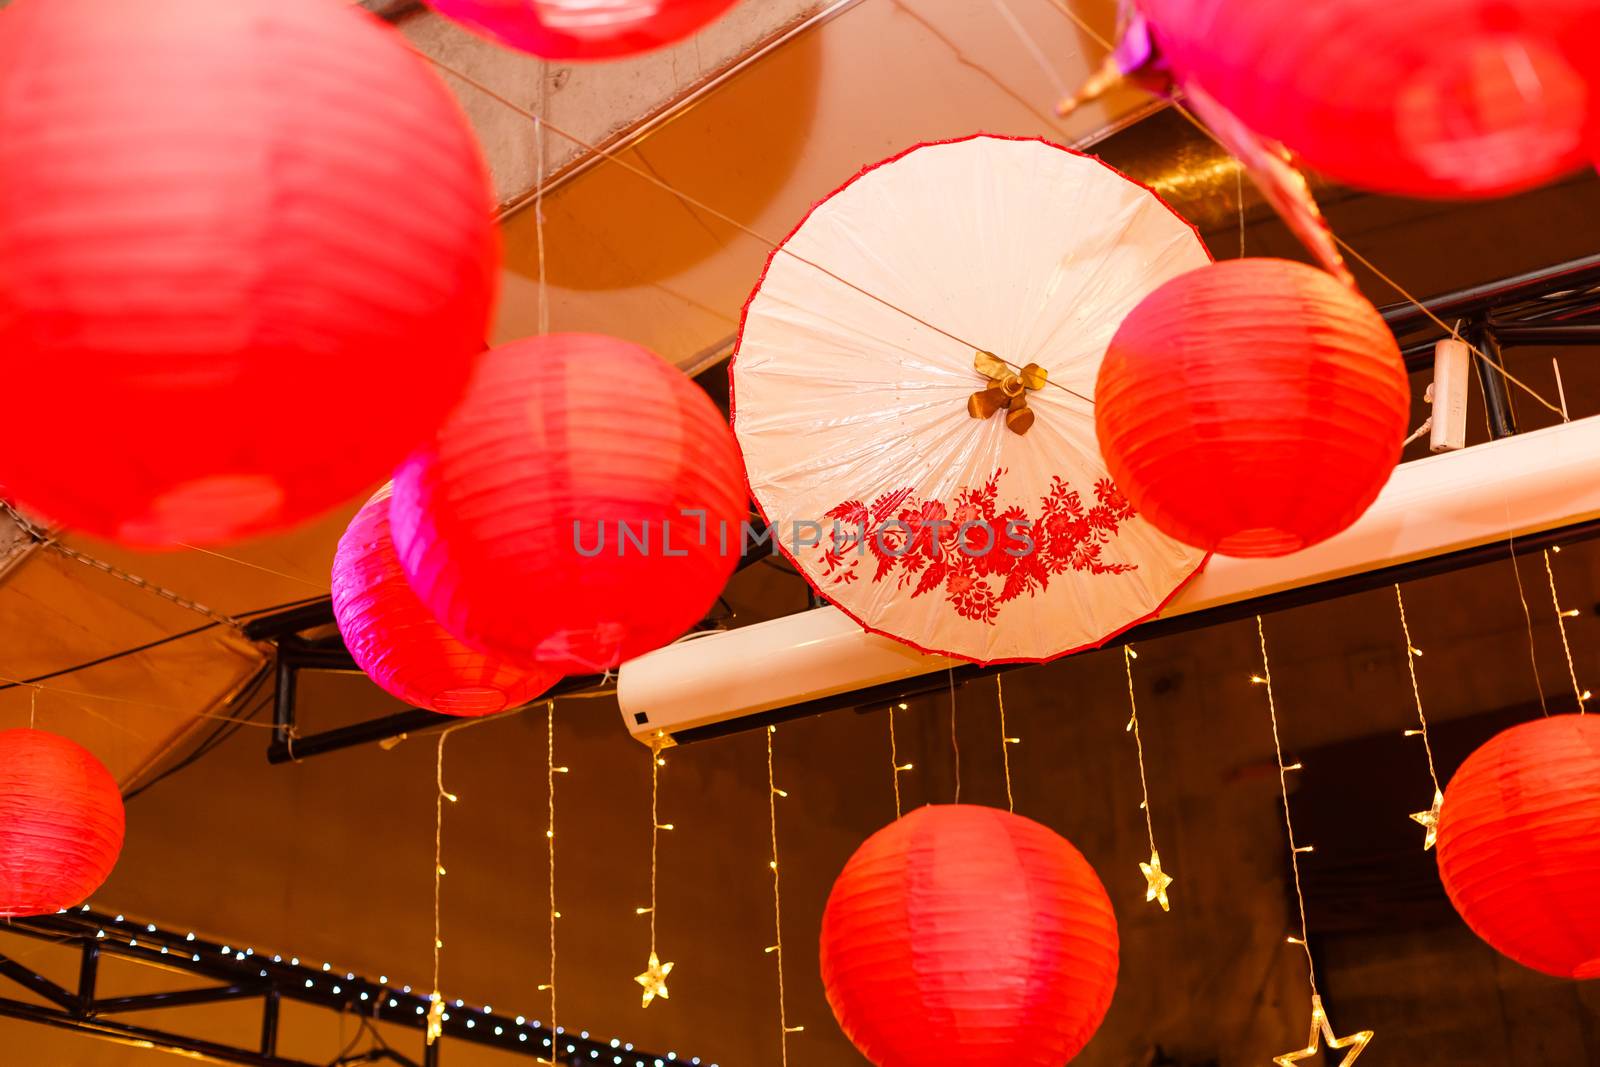 A red and white umbrella. High quality photo